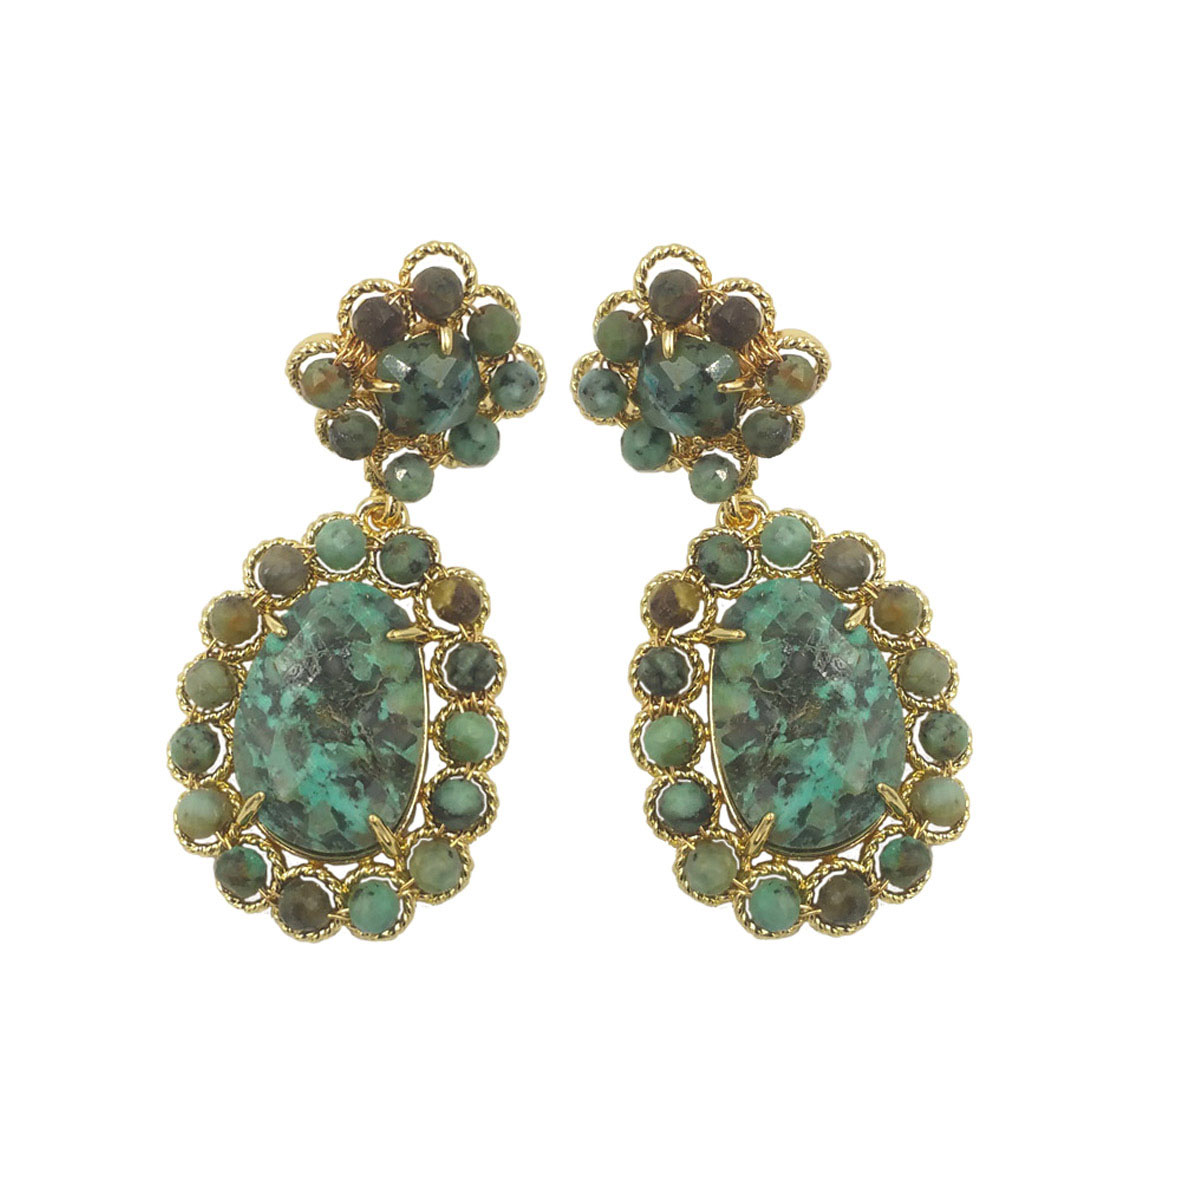 7:African turquoise